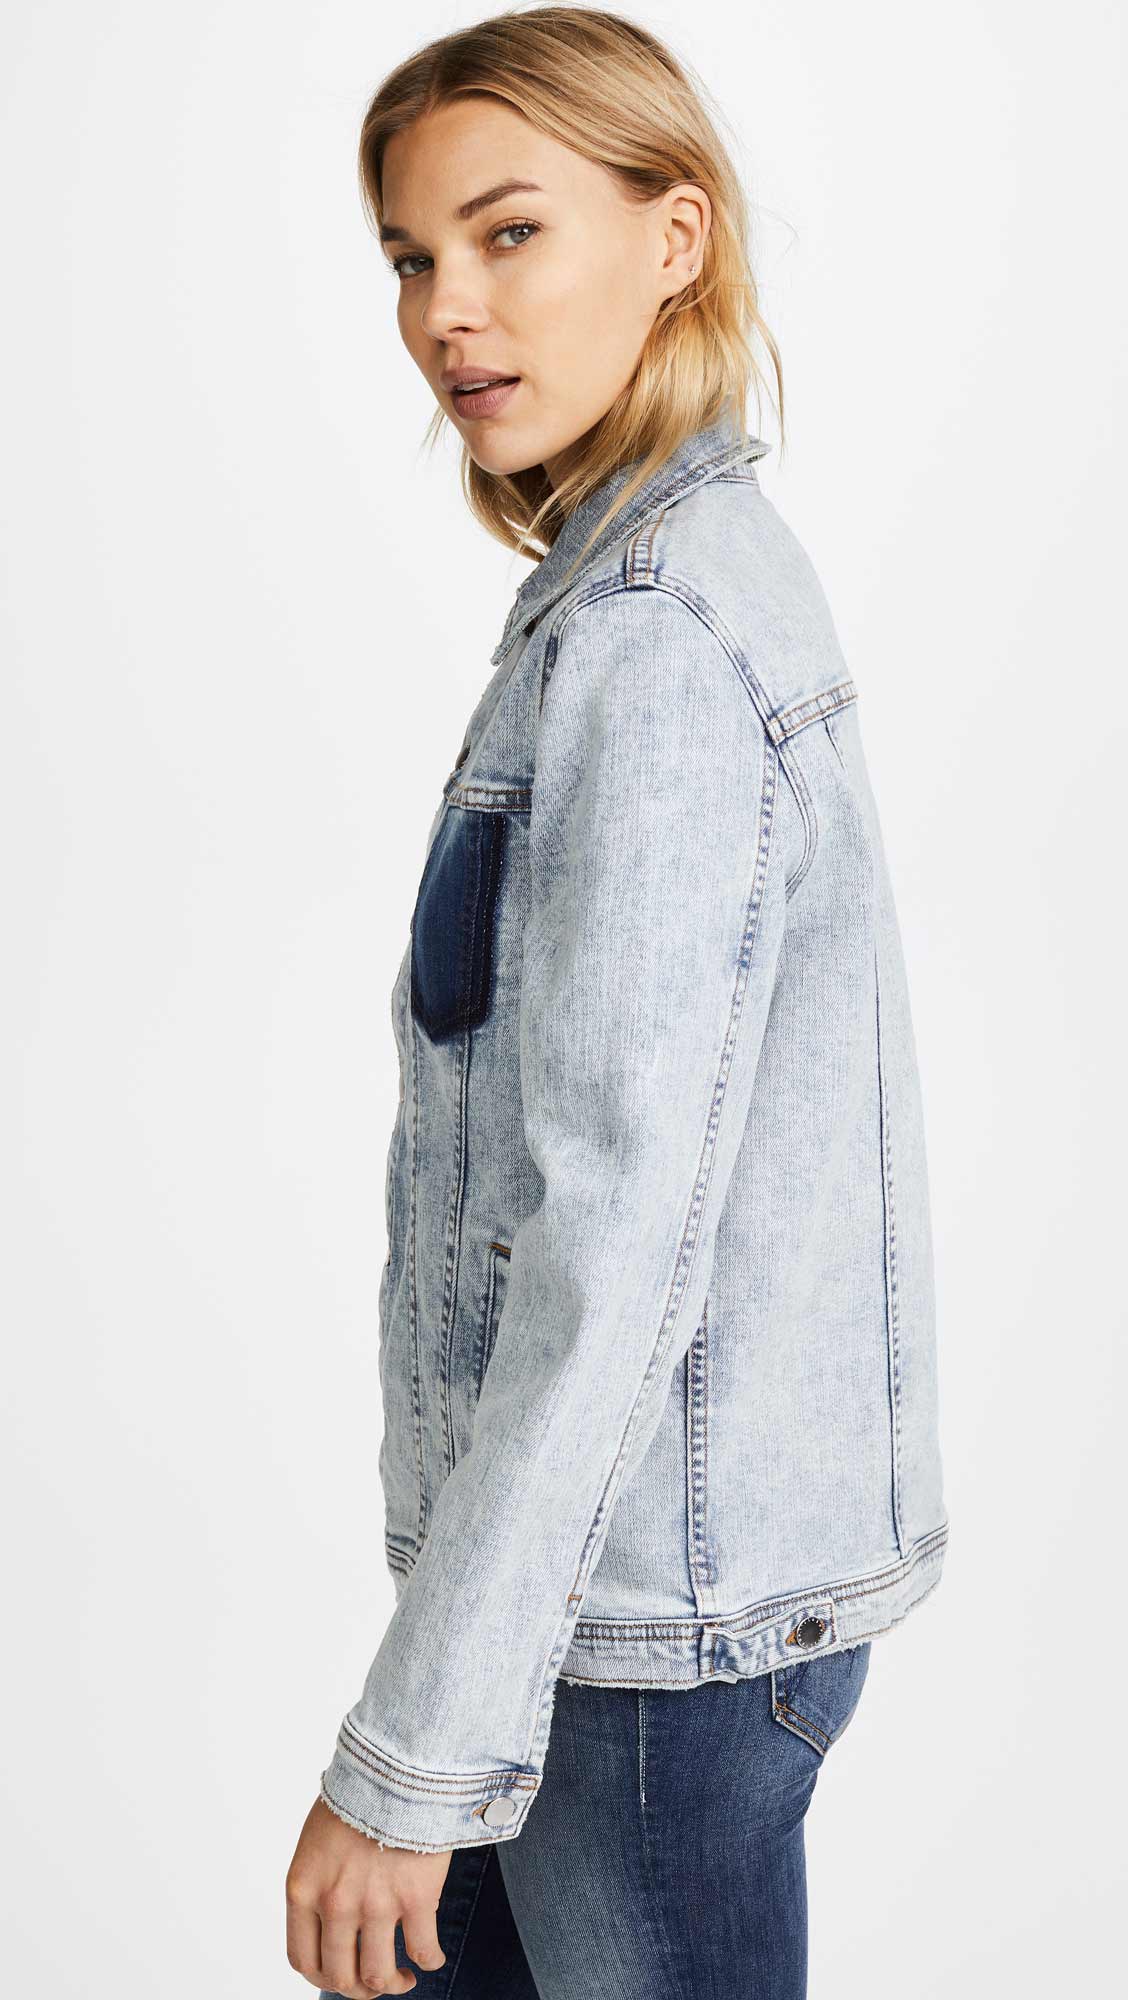 Find Of The Week: L’AGENCE Karina Oversized Jean Jacket - THE JEANS BLOG